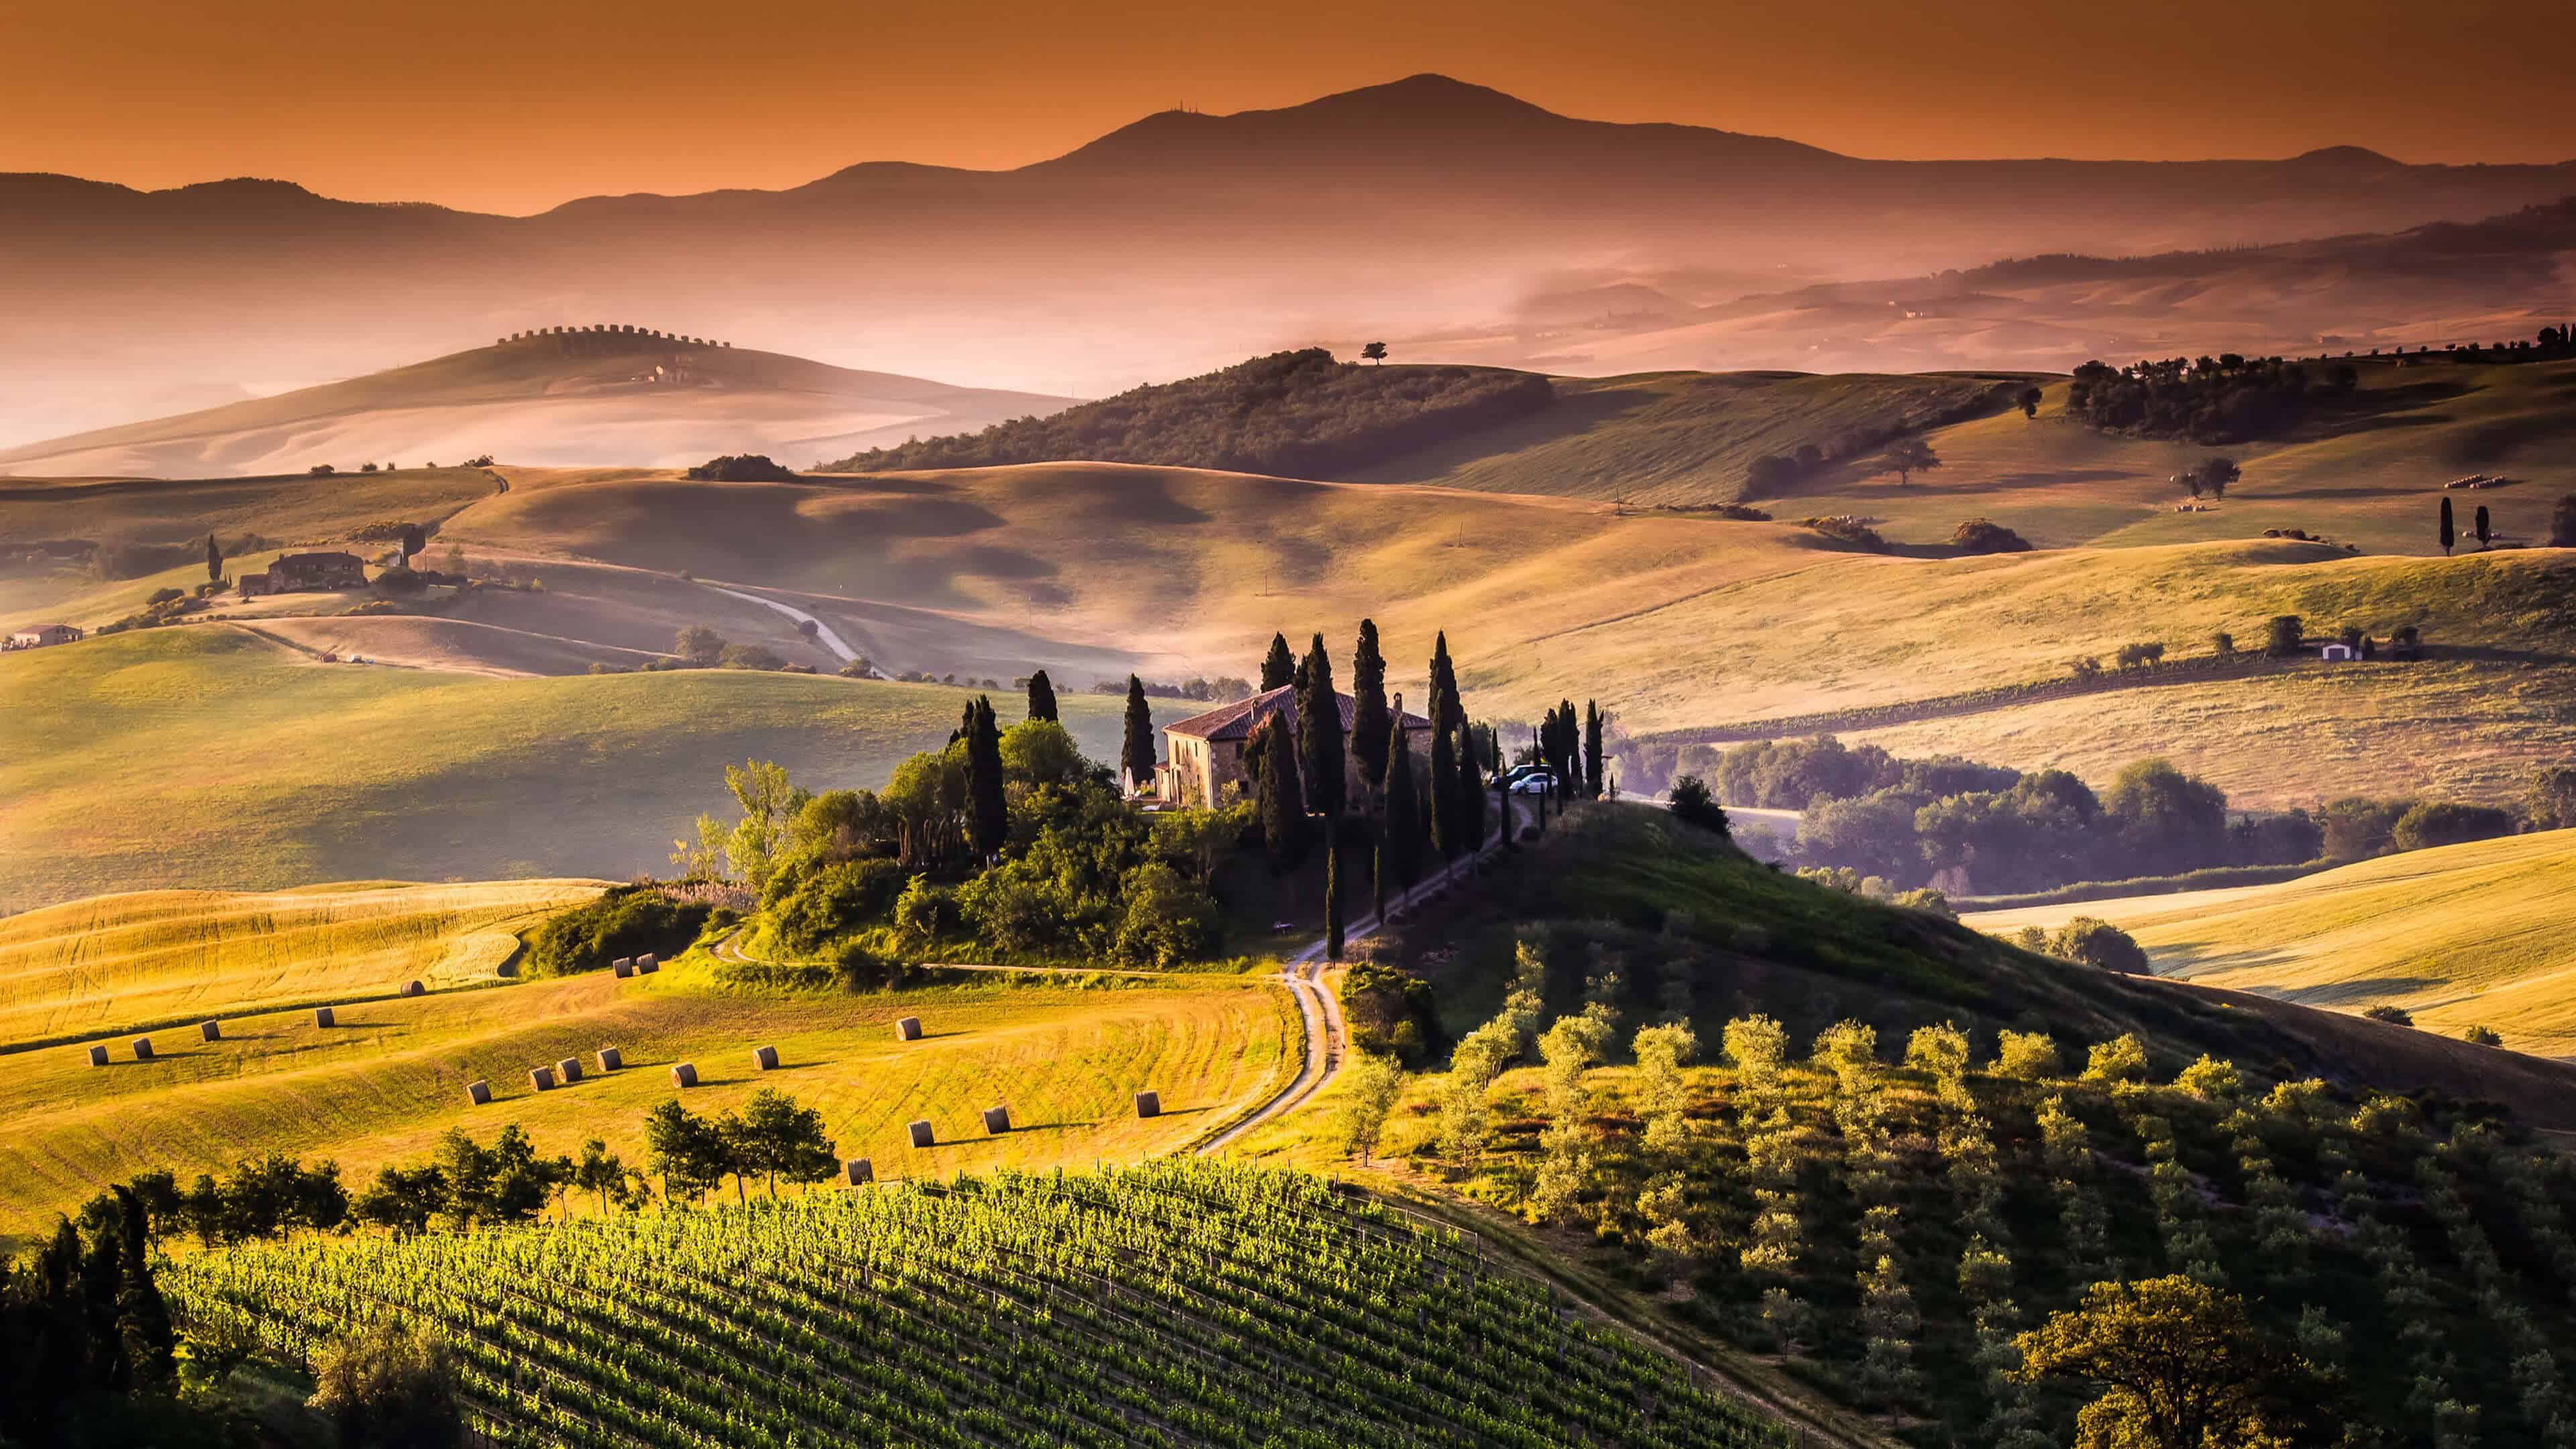 Vinyard And Mountains In Tuscany Italy UHD 4k Wallpaper